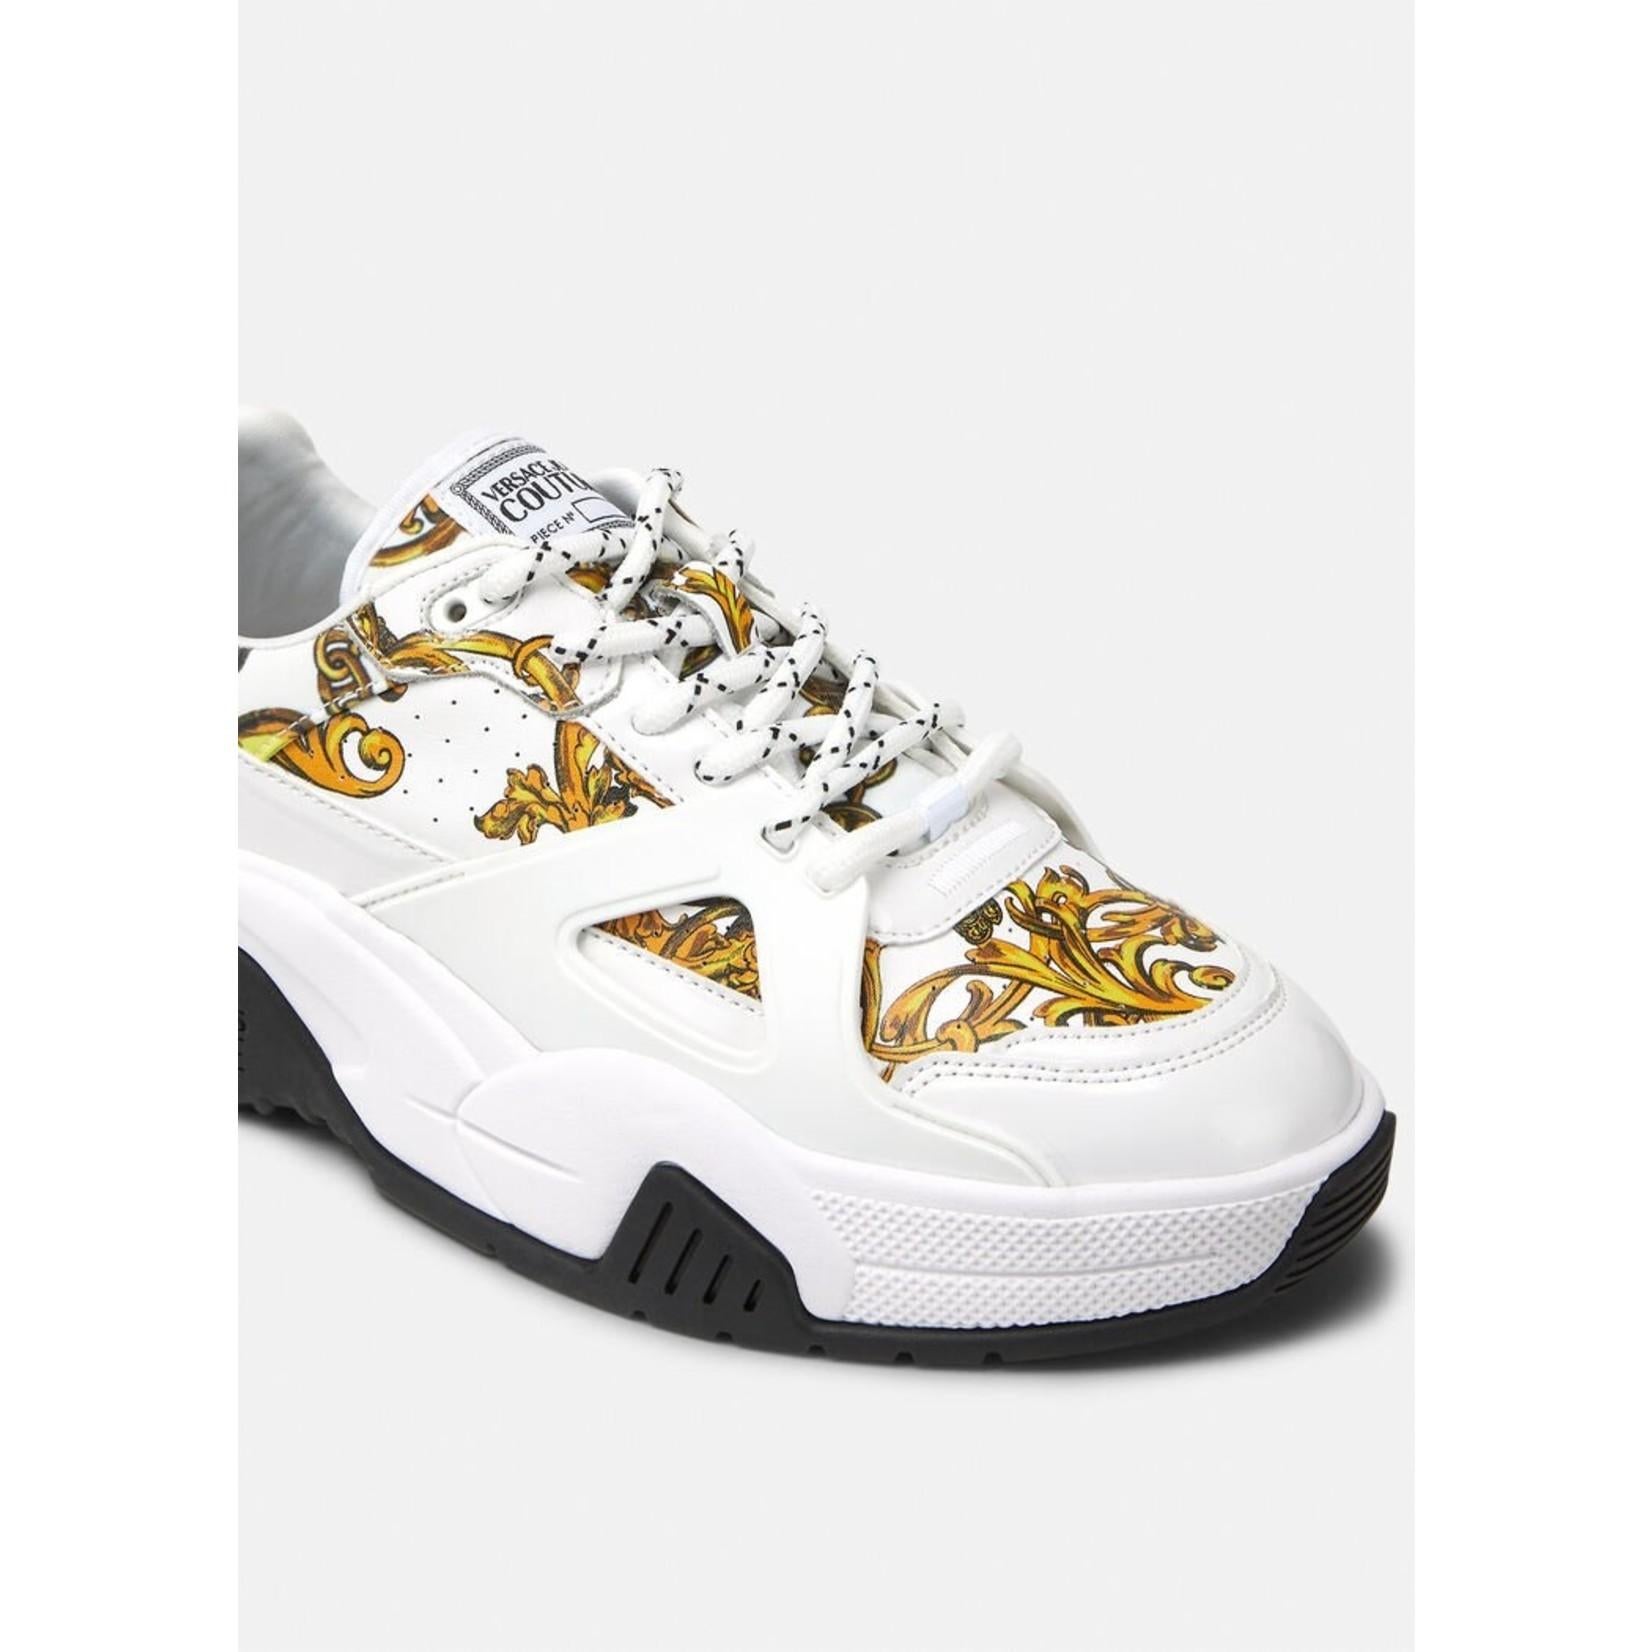 Low top, lace-up sneakers with a chunky sole. The design from the Stargaze line boasts the Regalia Baroque print.

Regalia Baroque print
Low top
lace-up
Chunky sole
Outer fabric: 70% Polyurethane, 30% Polyester
Lining: 85% Polyester, 15%